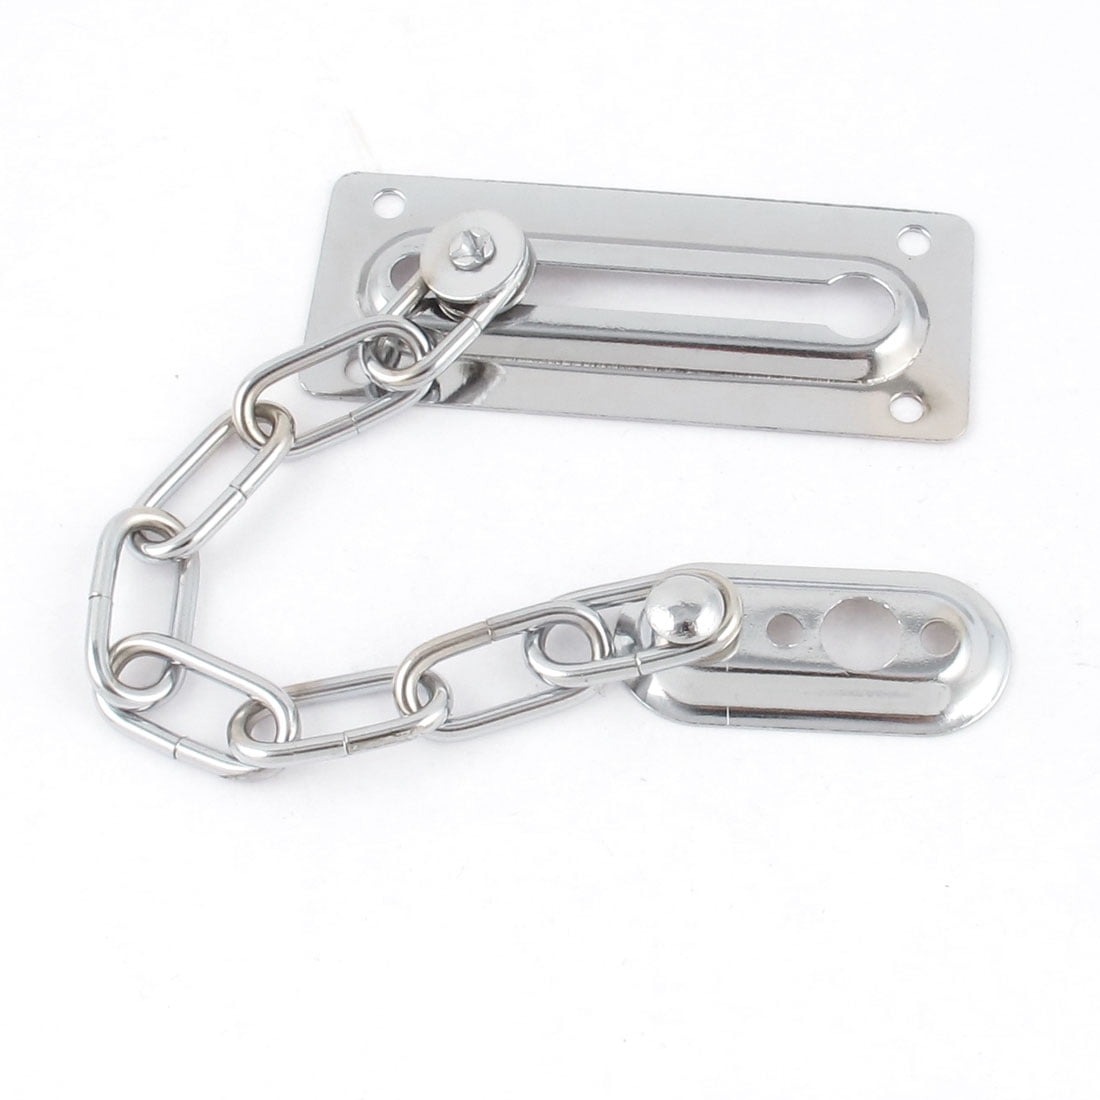 Stainless Steel Door Security Chain Guard Lock Latch Durable Anti-Theft Chain Lock Safety Security Guard Door Lock 01 Chain Door Lock 